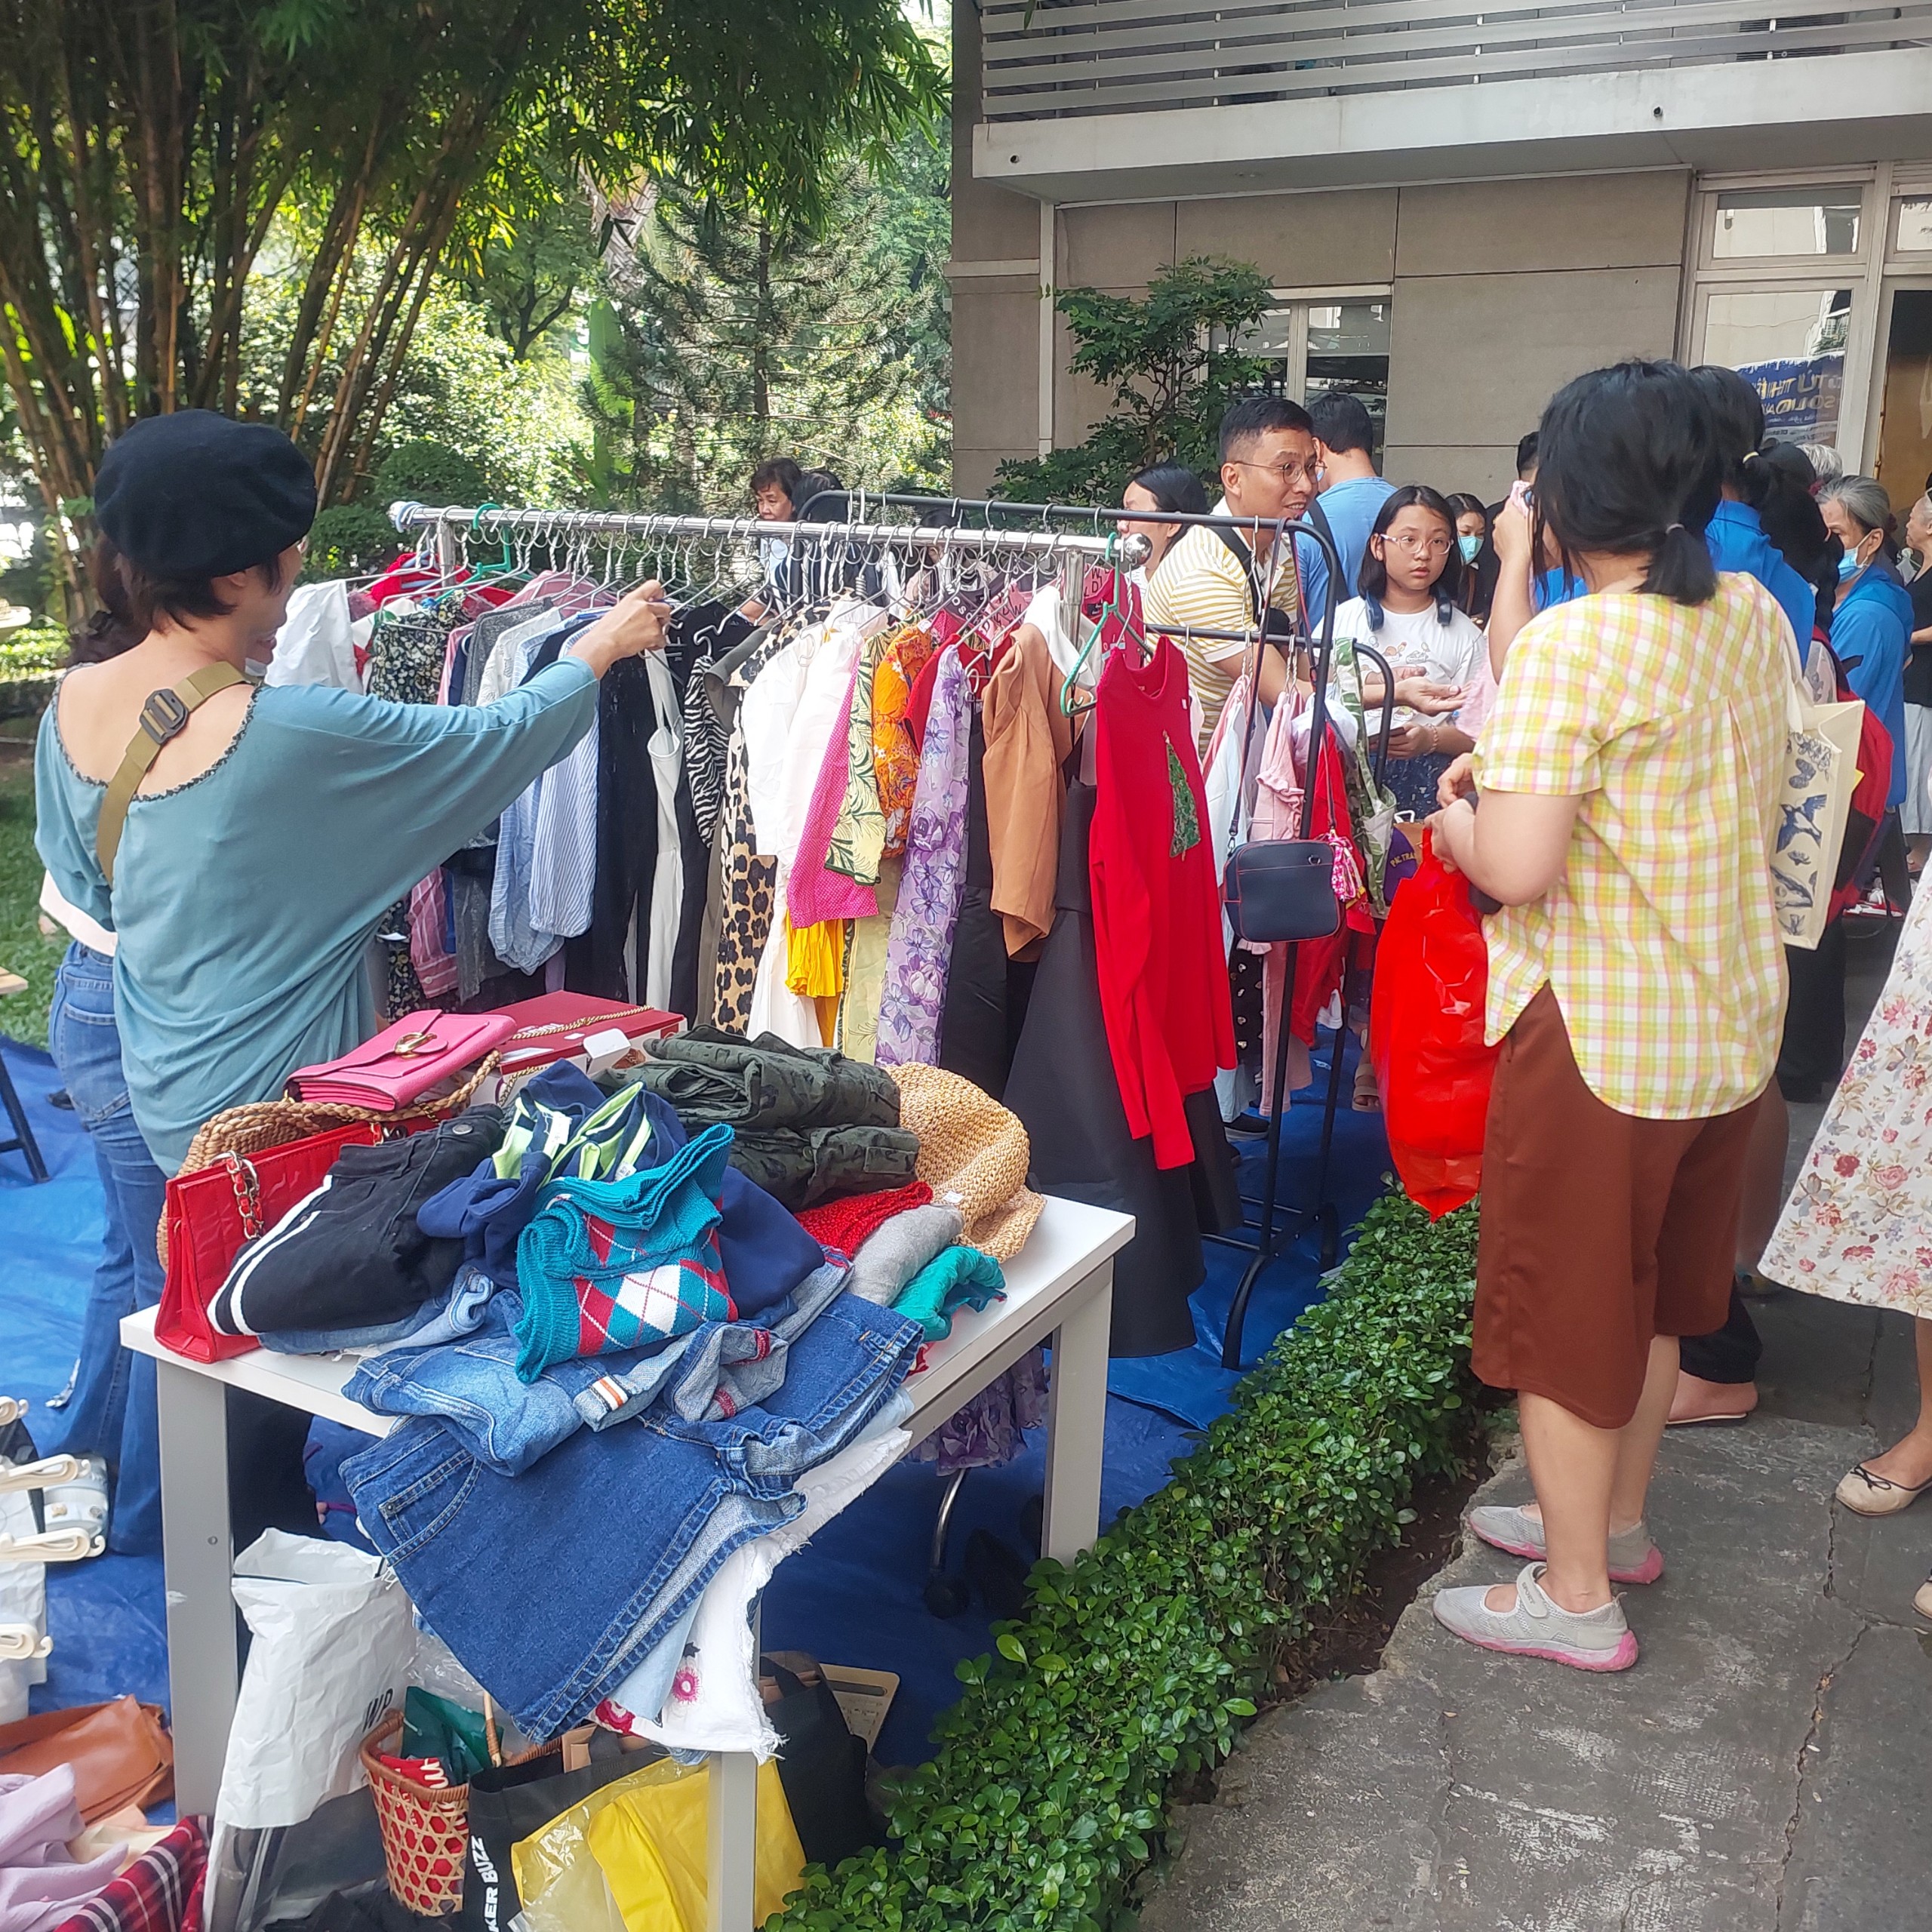 Items at the event are priced affordably, attracting numerous shoppers. Photo: Minh Chau / Tuoi Tre News